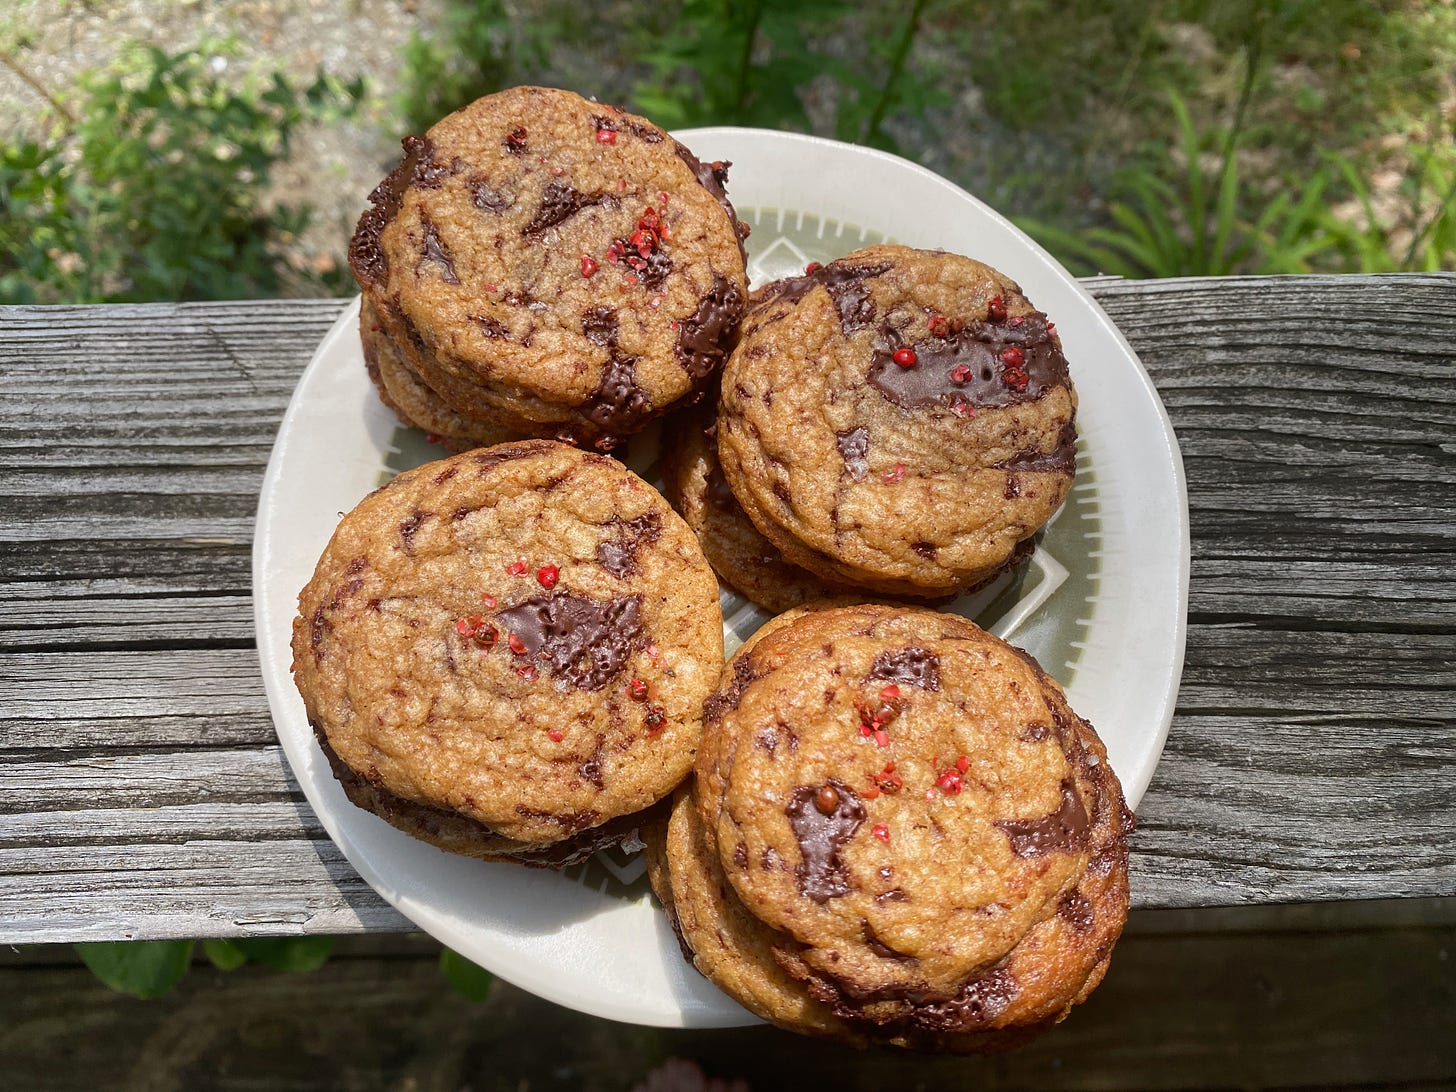 A plate of crinkly chocolate chip cookies sprinkled with pink peppercorns and falky salt, sitting on a porch railing.